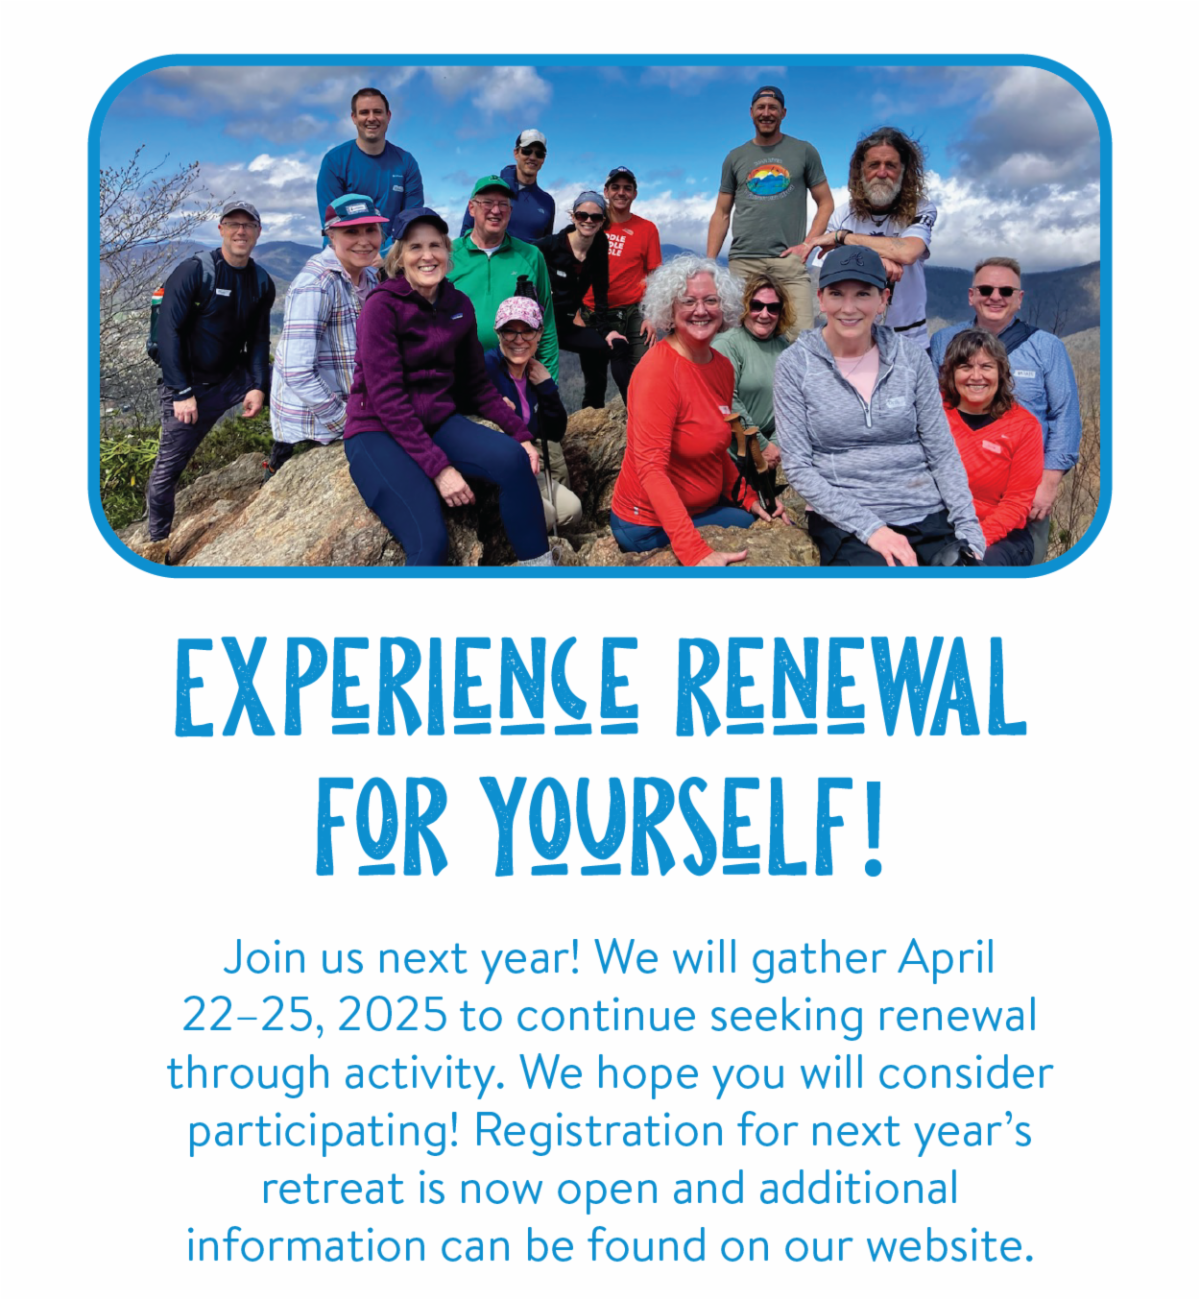 Experience renewal for yourself! - Join us next year! We will gather April 22–25, 2025, to continue seeking renewal through activity. We hope you will consider participating! Registration for next year’s retreat is now open and additional information can be found on our website.